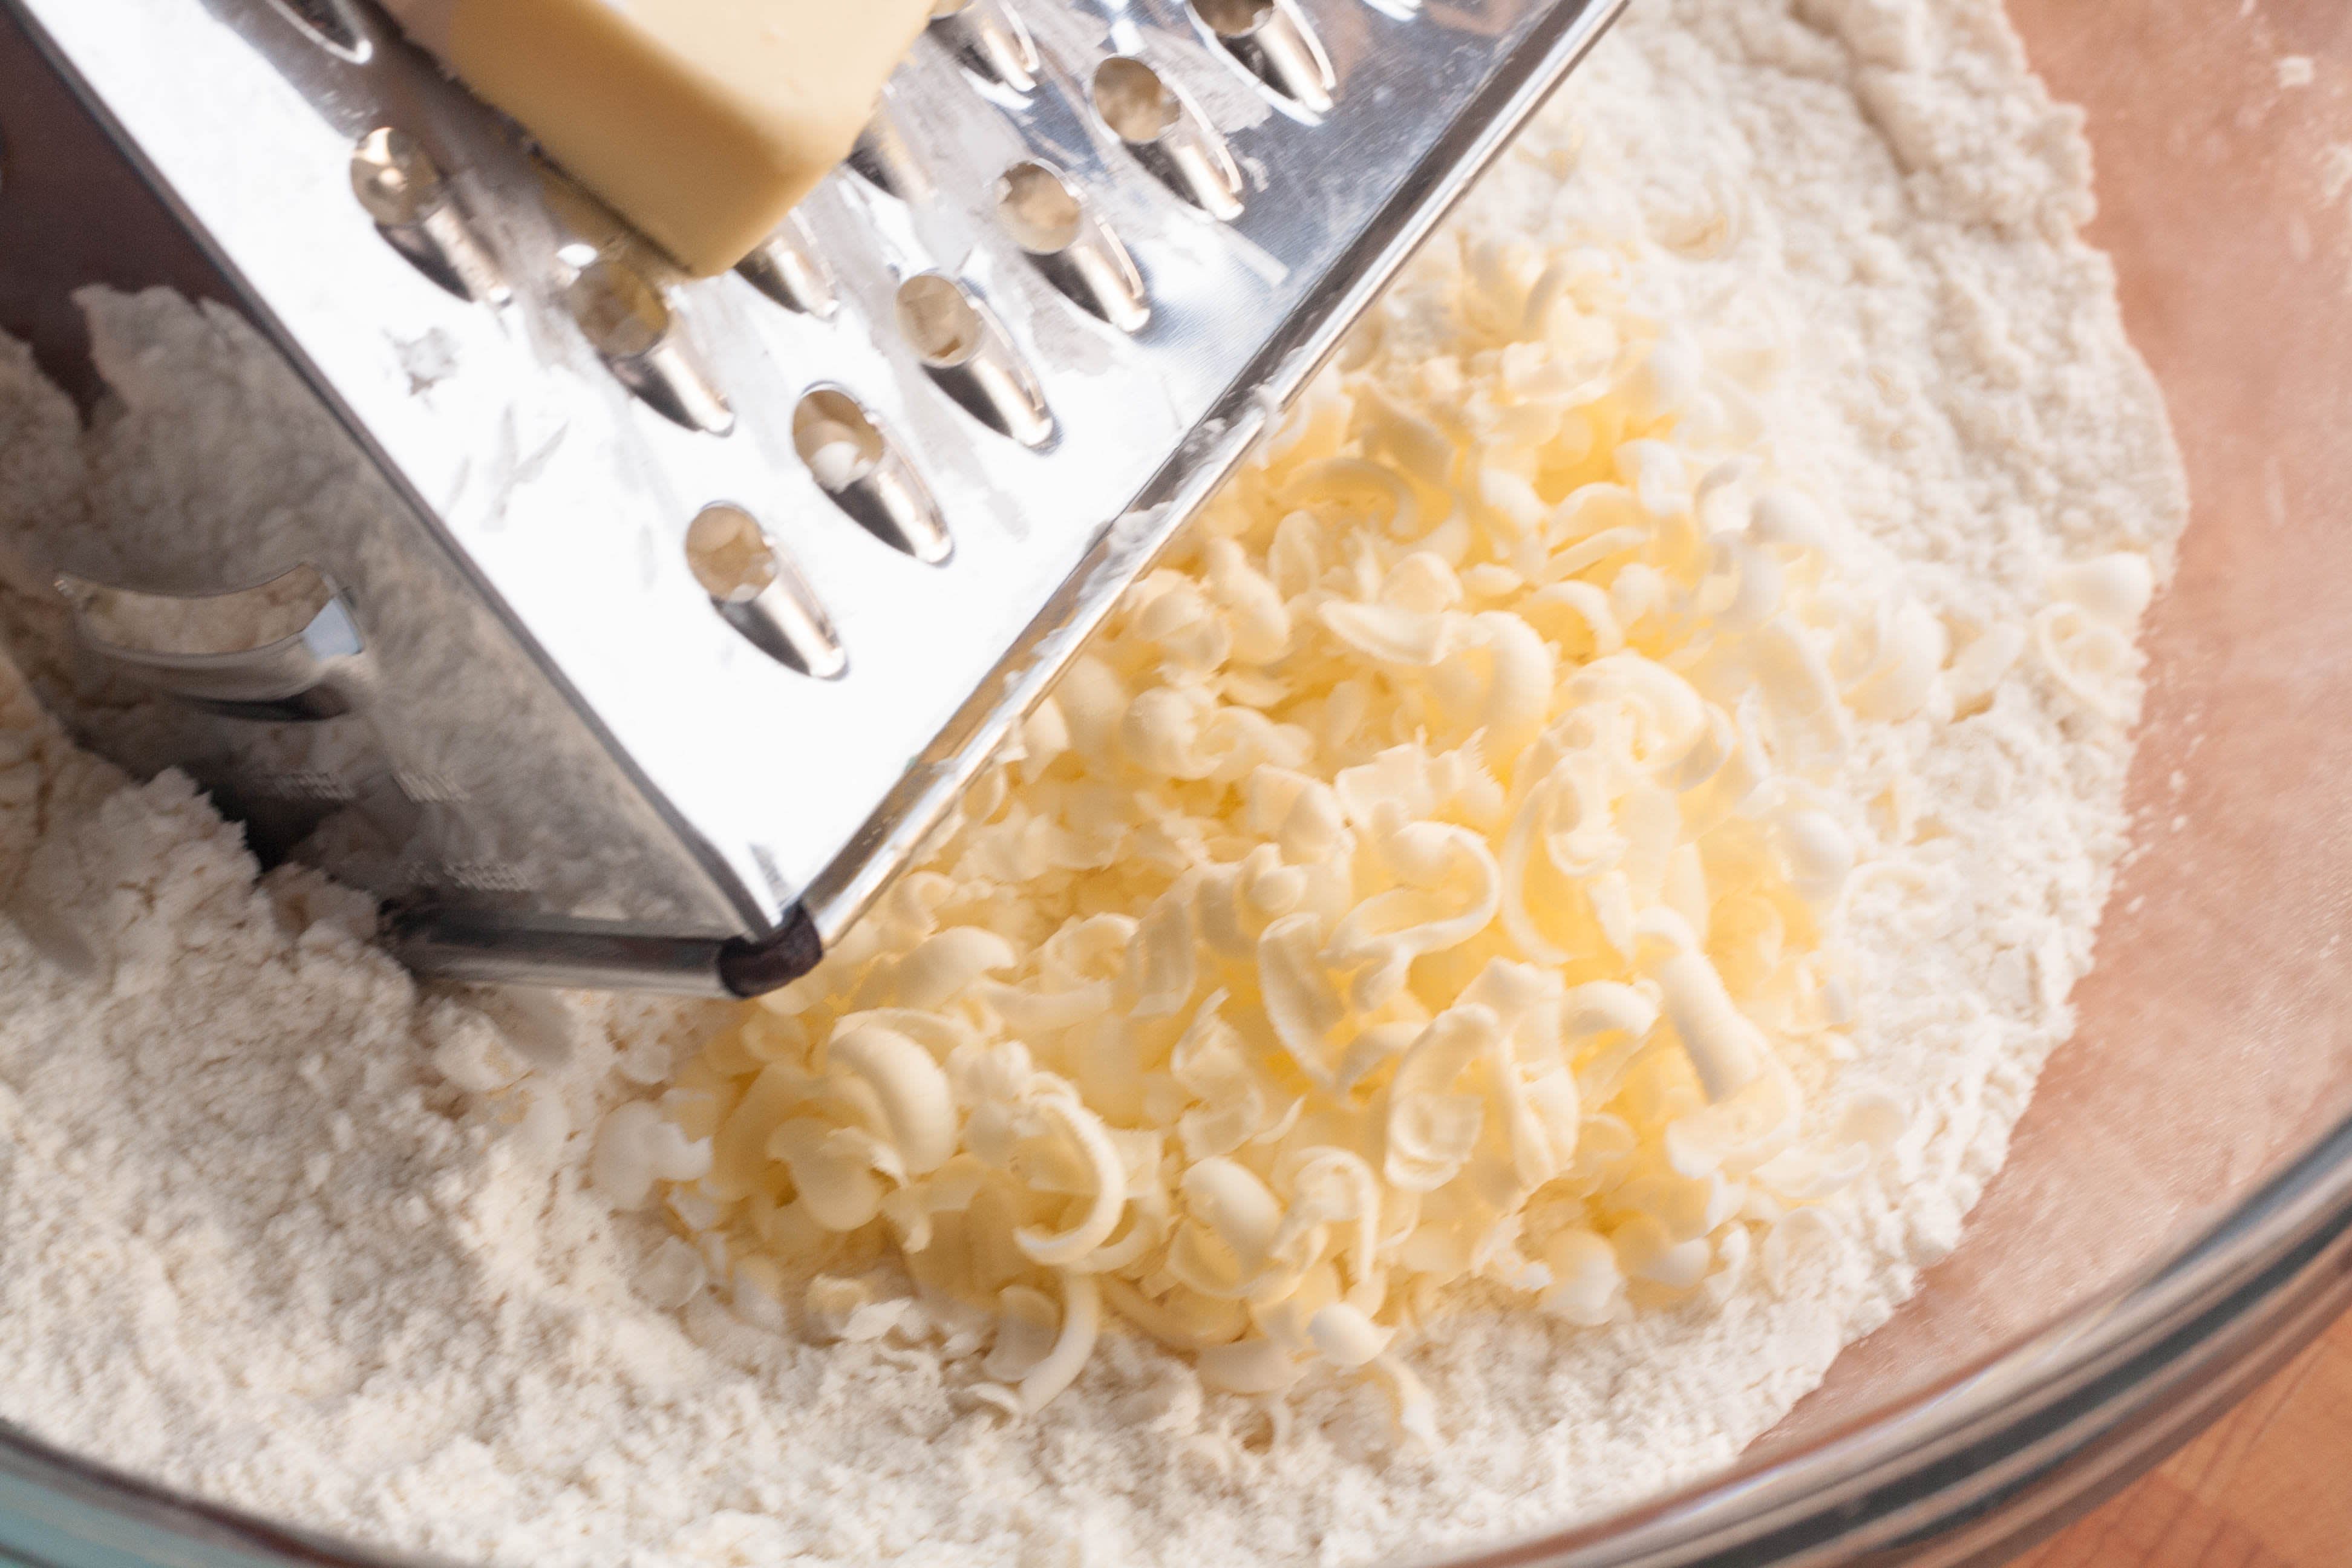 Why You Should Grate the Butter the Next Time You Bake